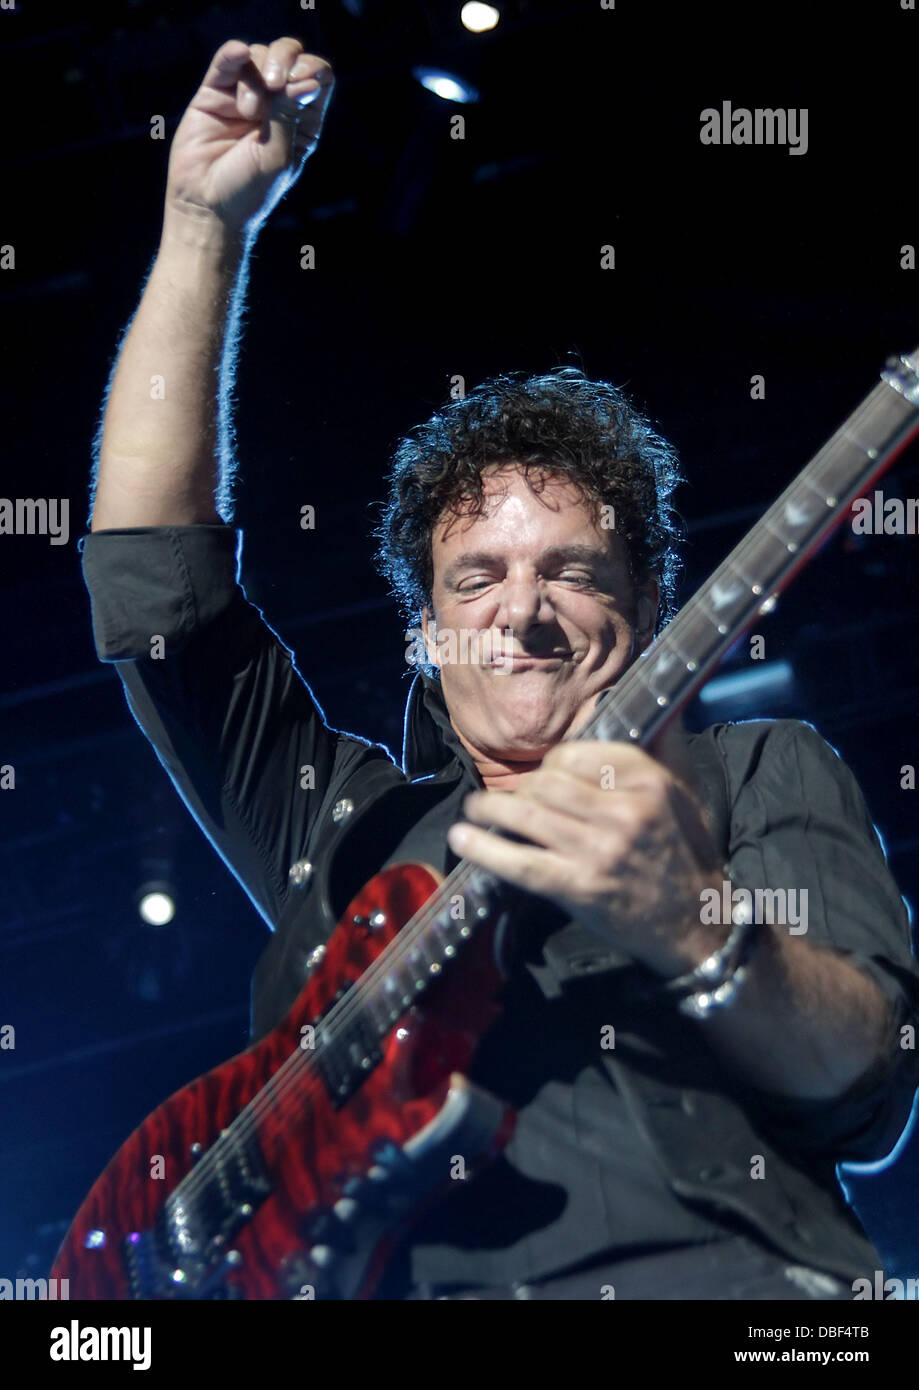 Journey's Neal Schon on Selling His 'Don't Stop Believing' Guitar